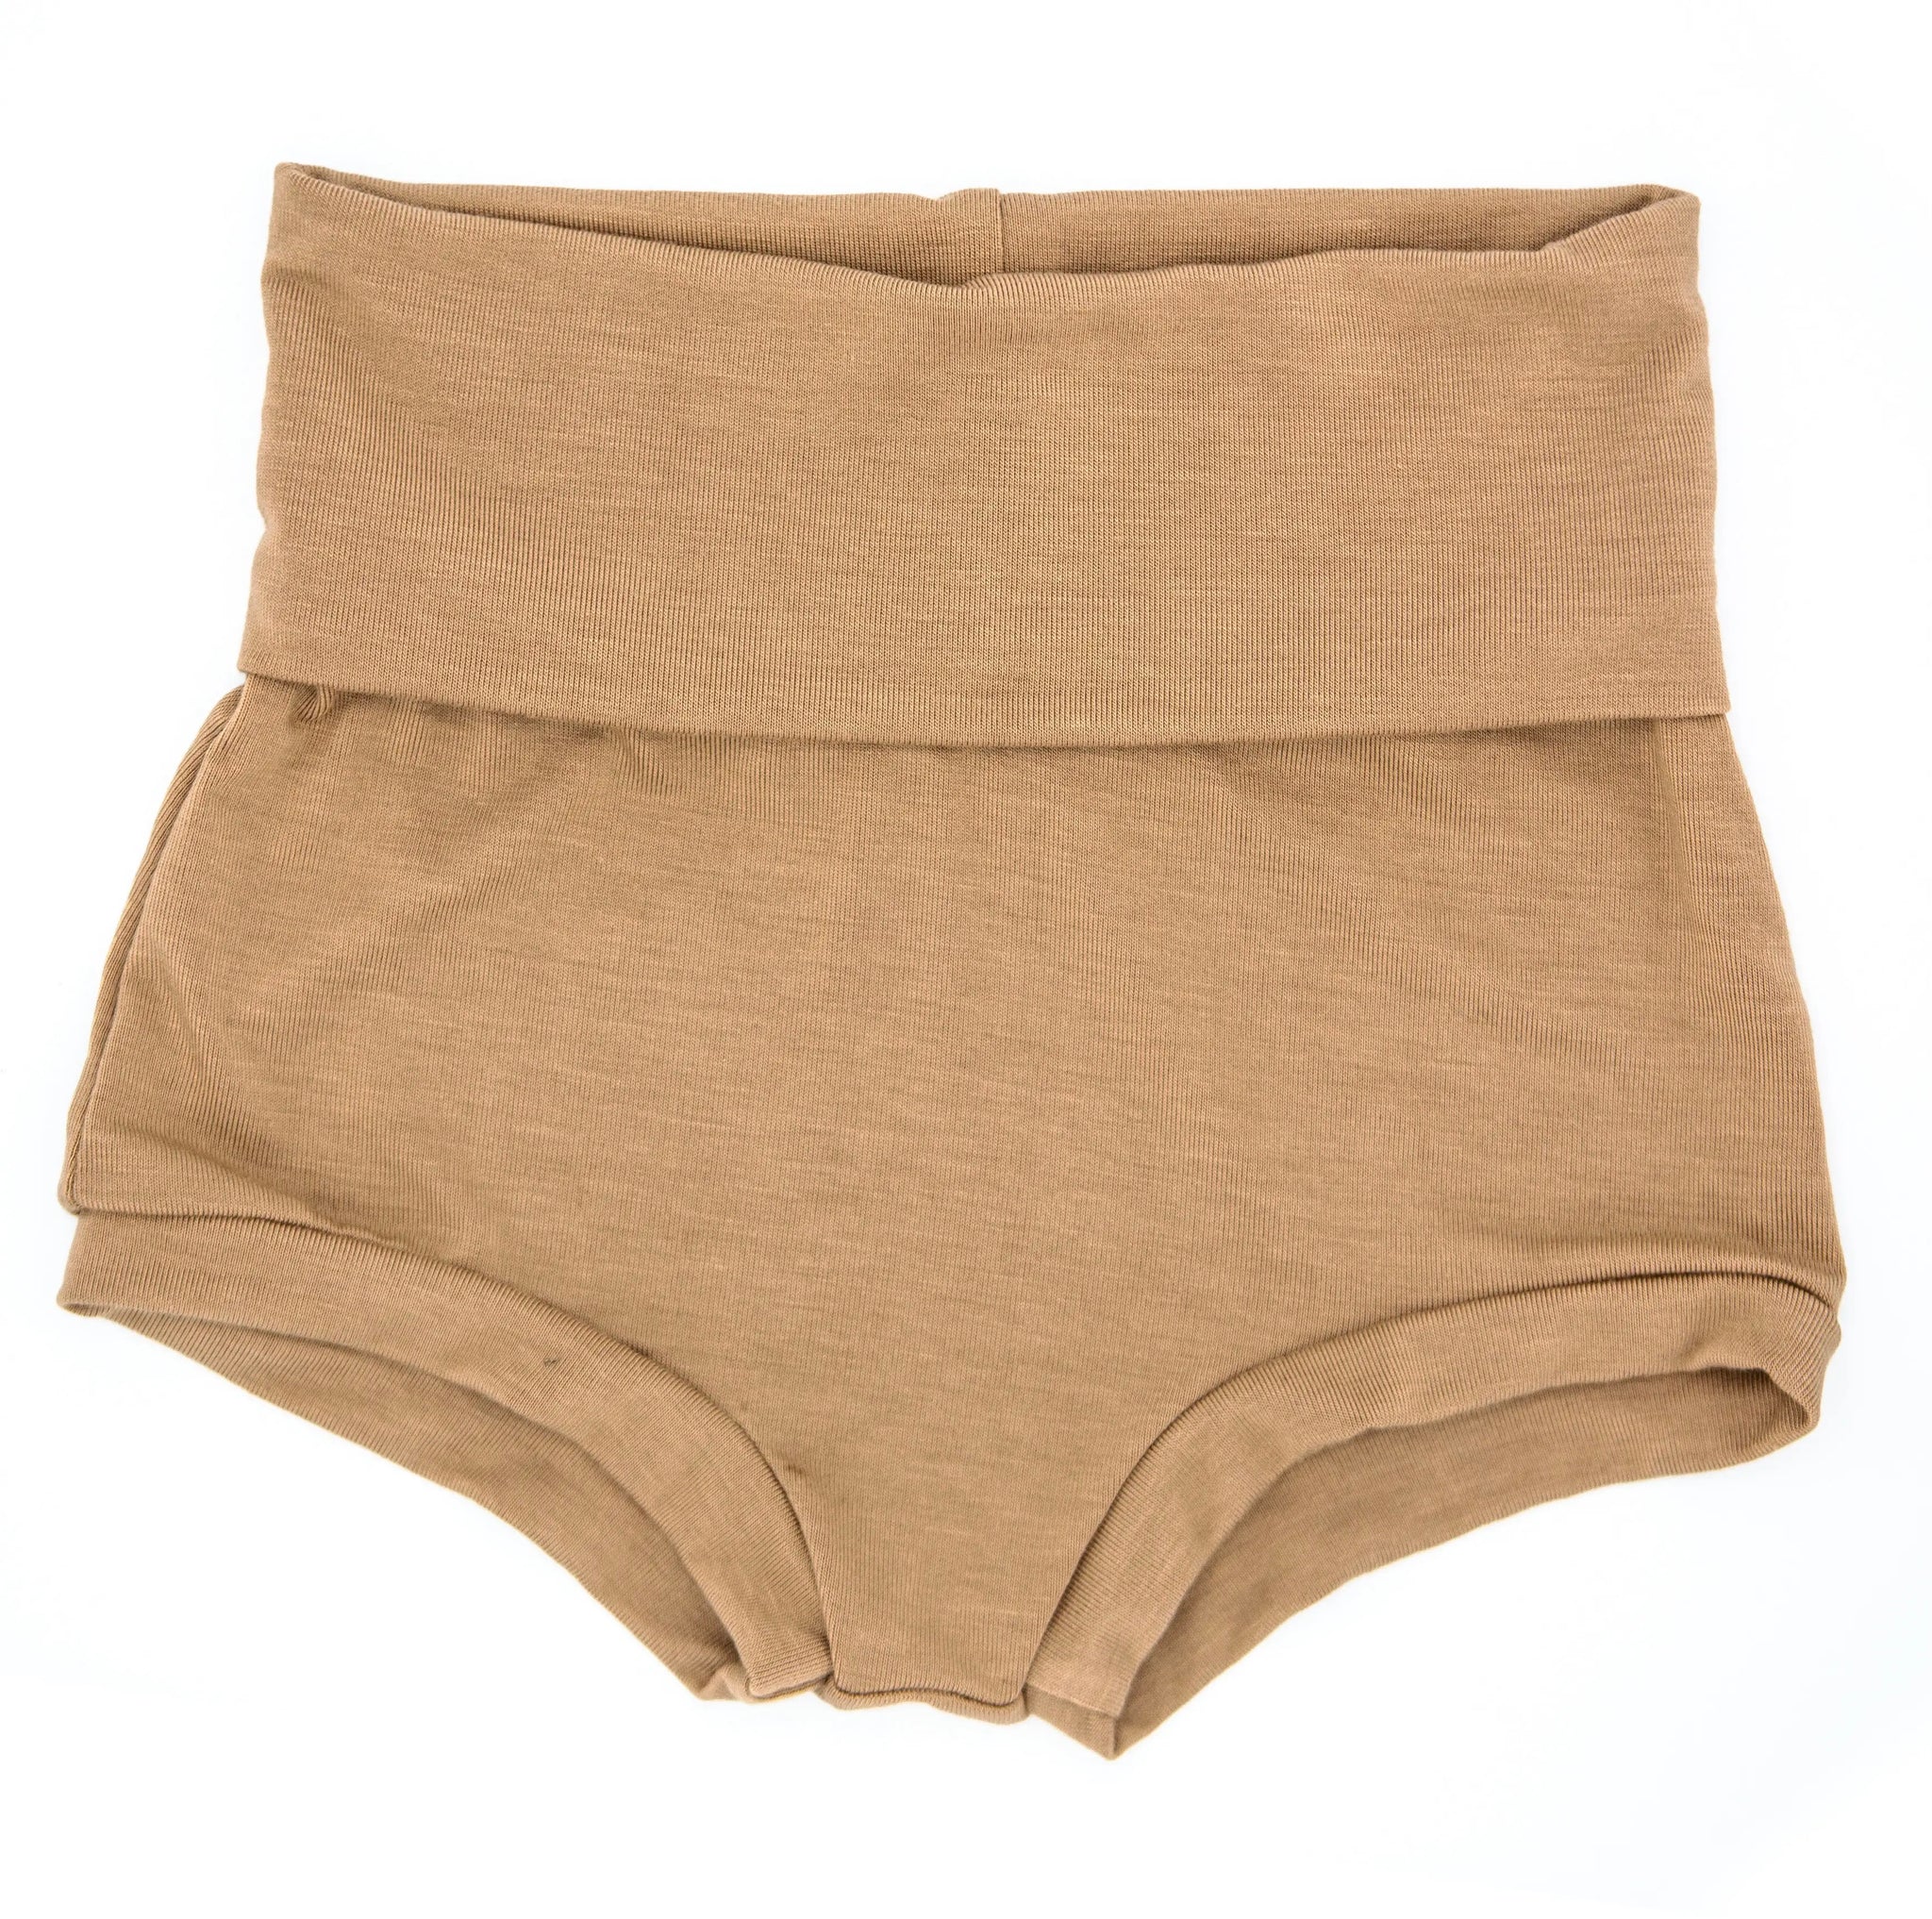 BAMBOO BLOOMERS - CLAY